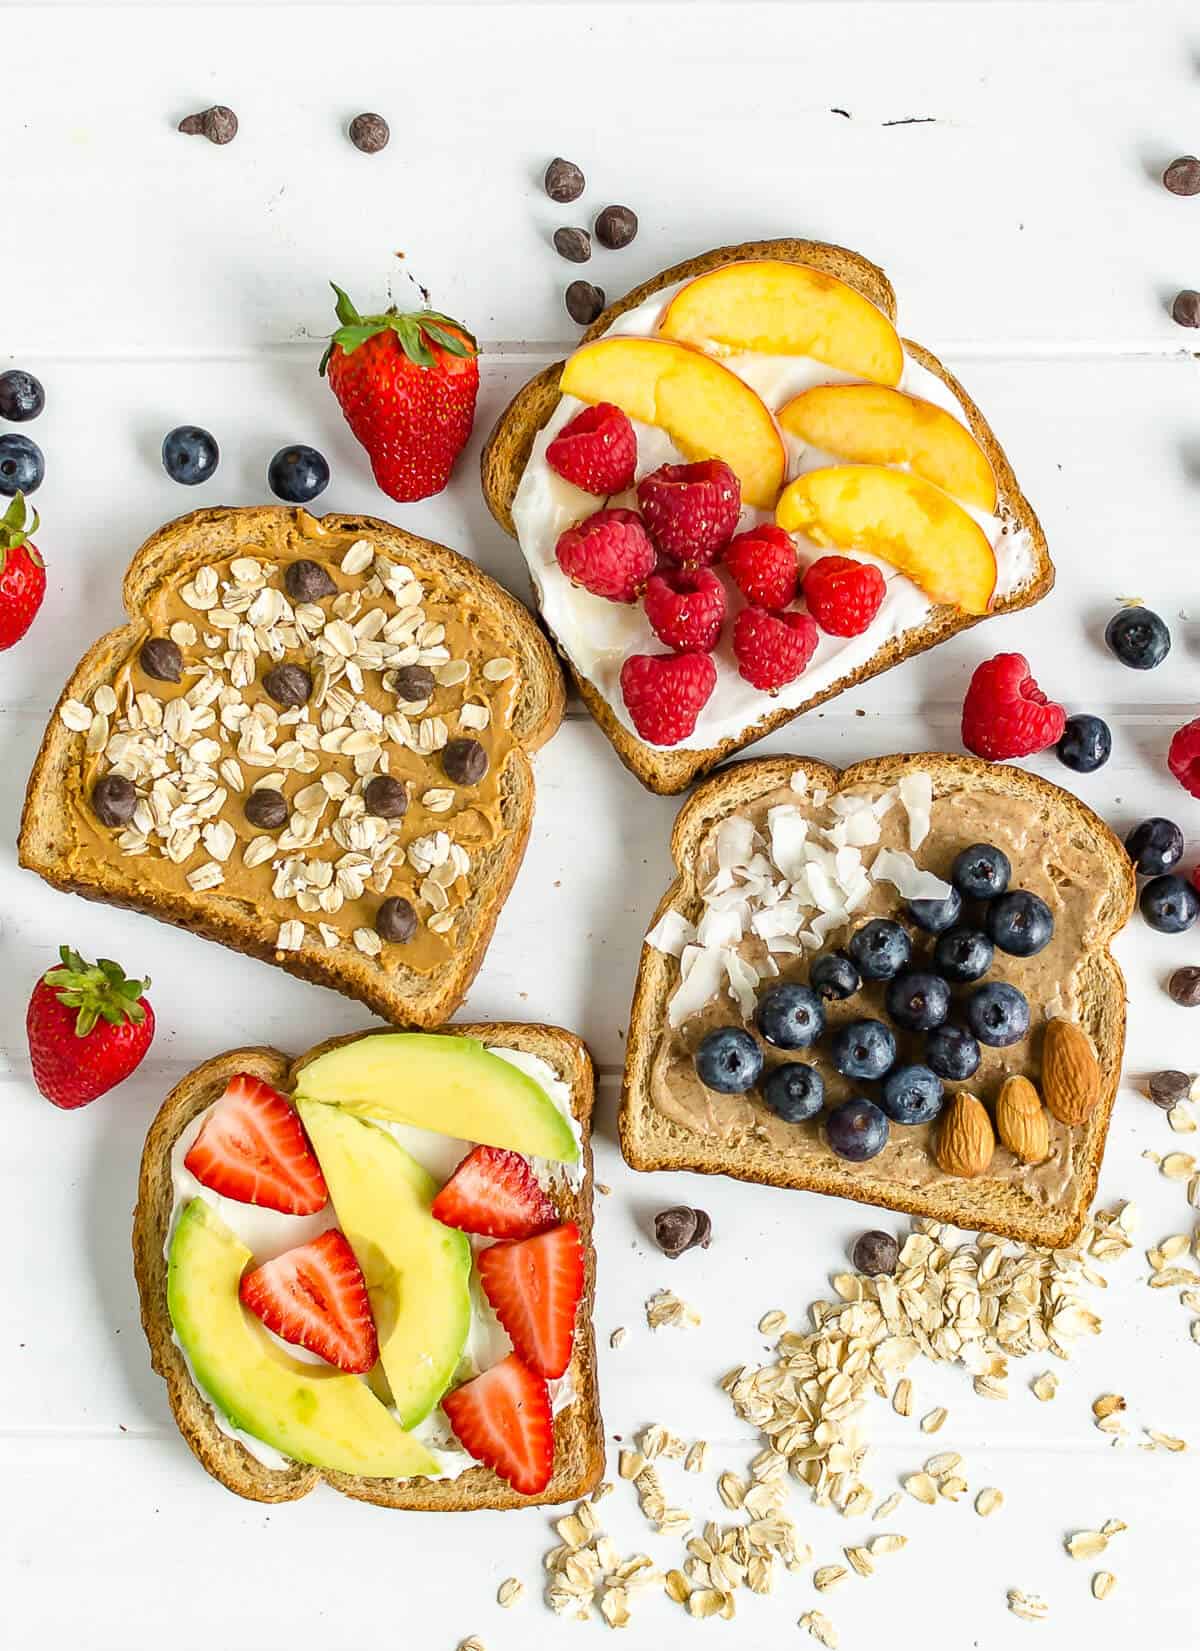 4 breakfast toast ideas, 1 slice with peanut butter, rolled oats and chocolate chips, 1 with yogurt, honey, fresh raspberries and fresh peaches, 1 with almond butter, coconut and fresh blueberries, 1 with cream cheese, avocado slices, and sliced strawberries